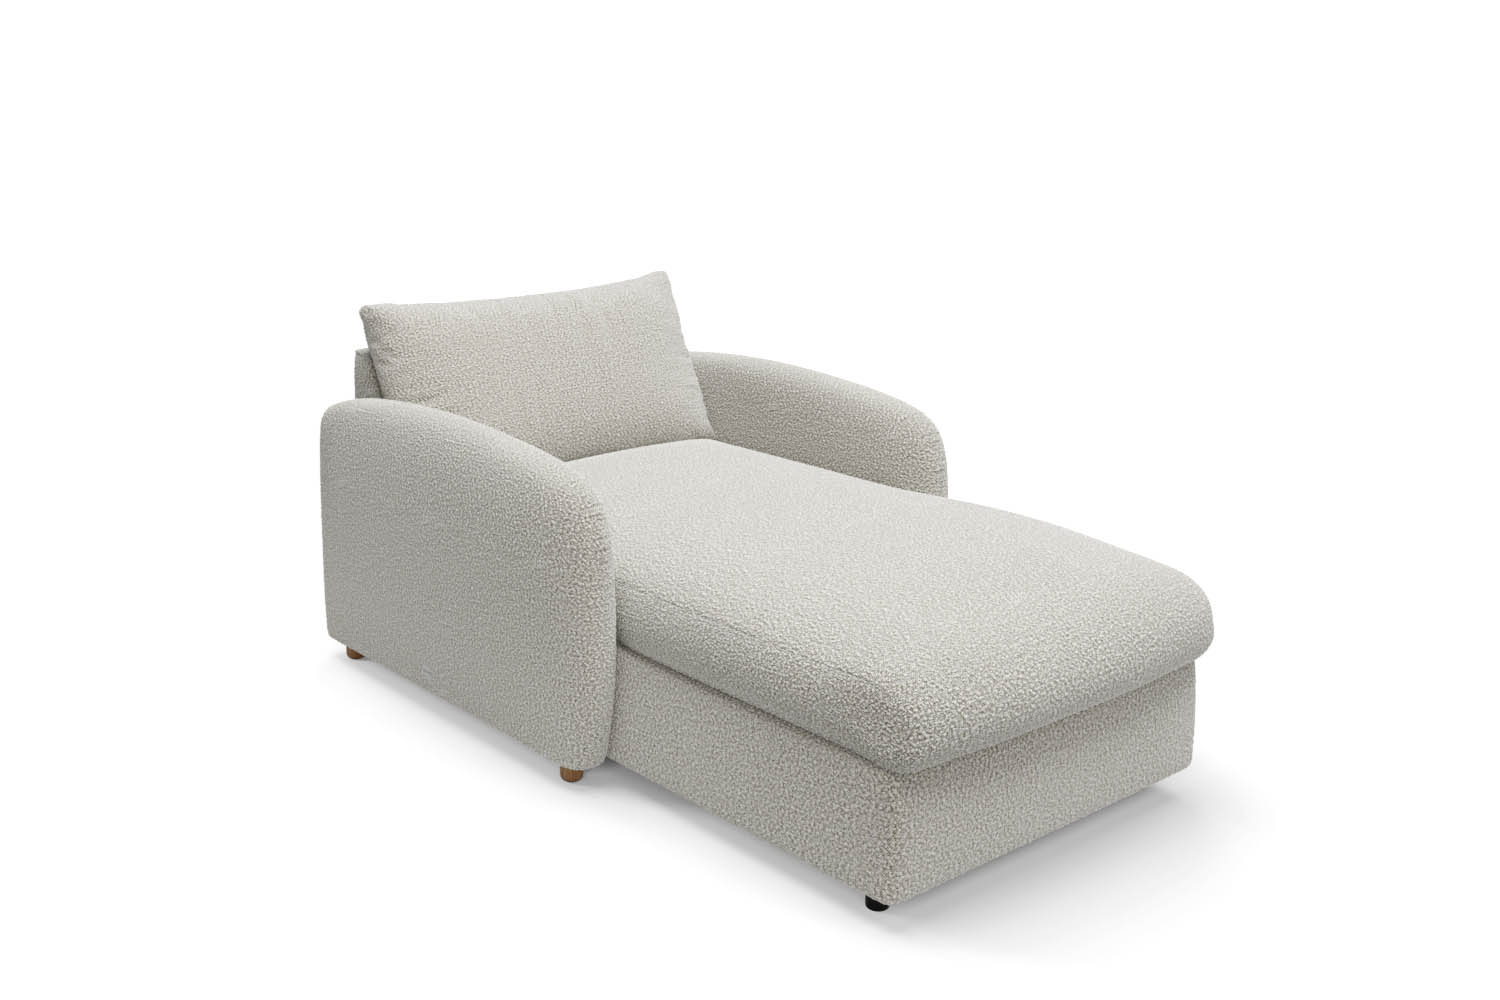 The Small Biggie - Chaise Longue - Fuzzy White Boucle